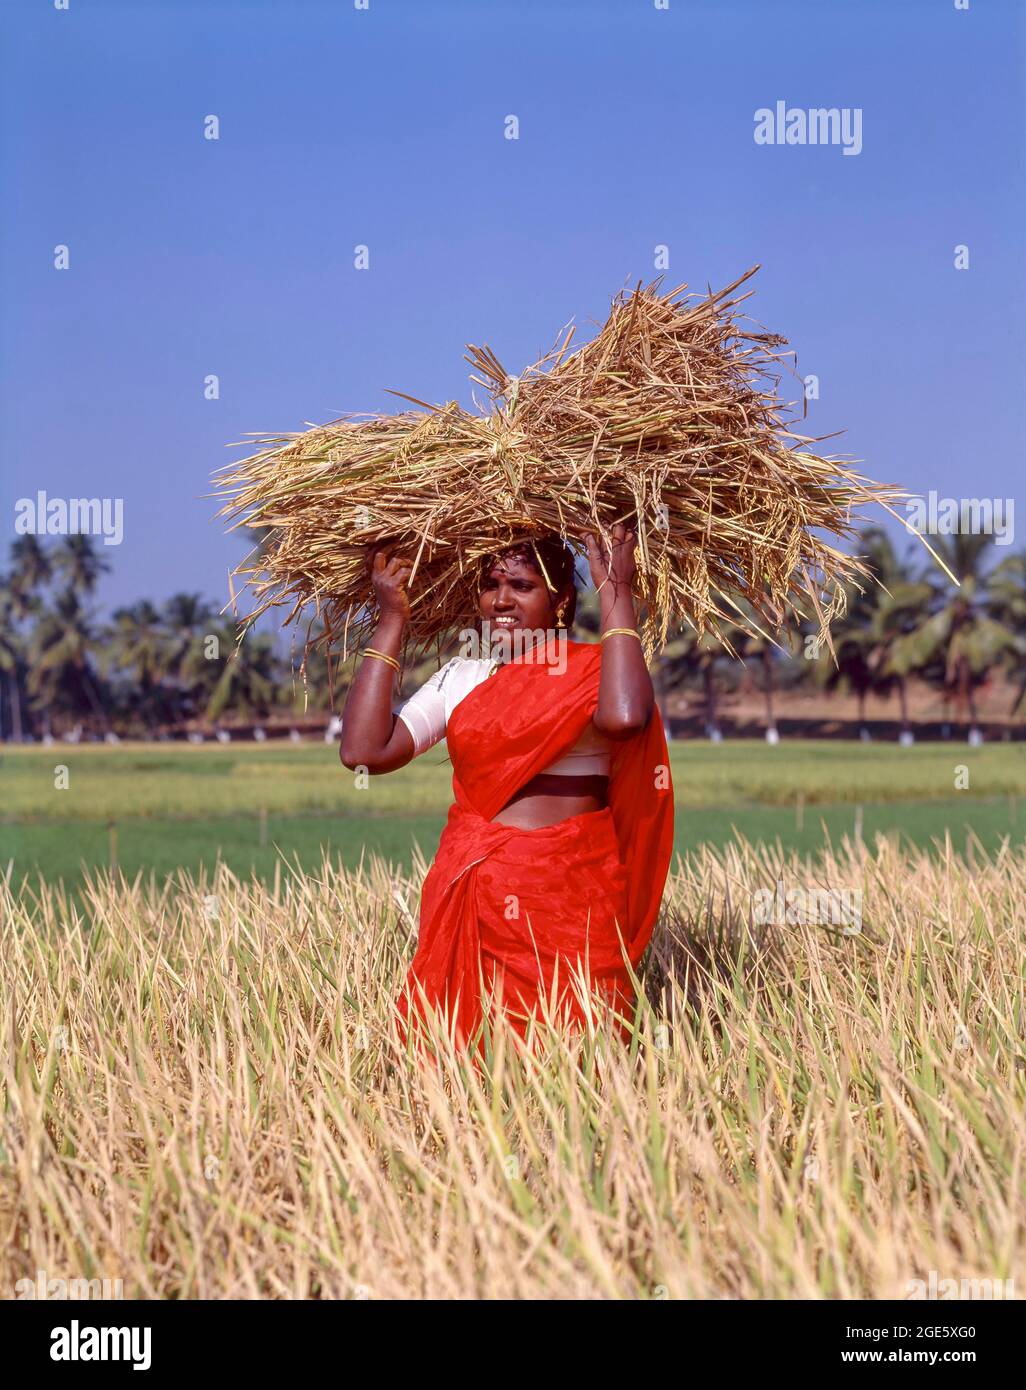 Woman holding a bunch of sheaves with rice on head and standing in a rice field, Coimbatore, Tamil Nadu, India Stock Photo